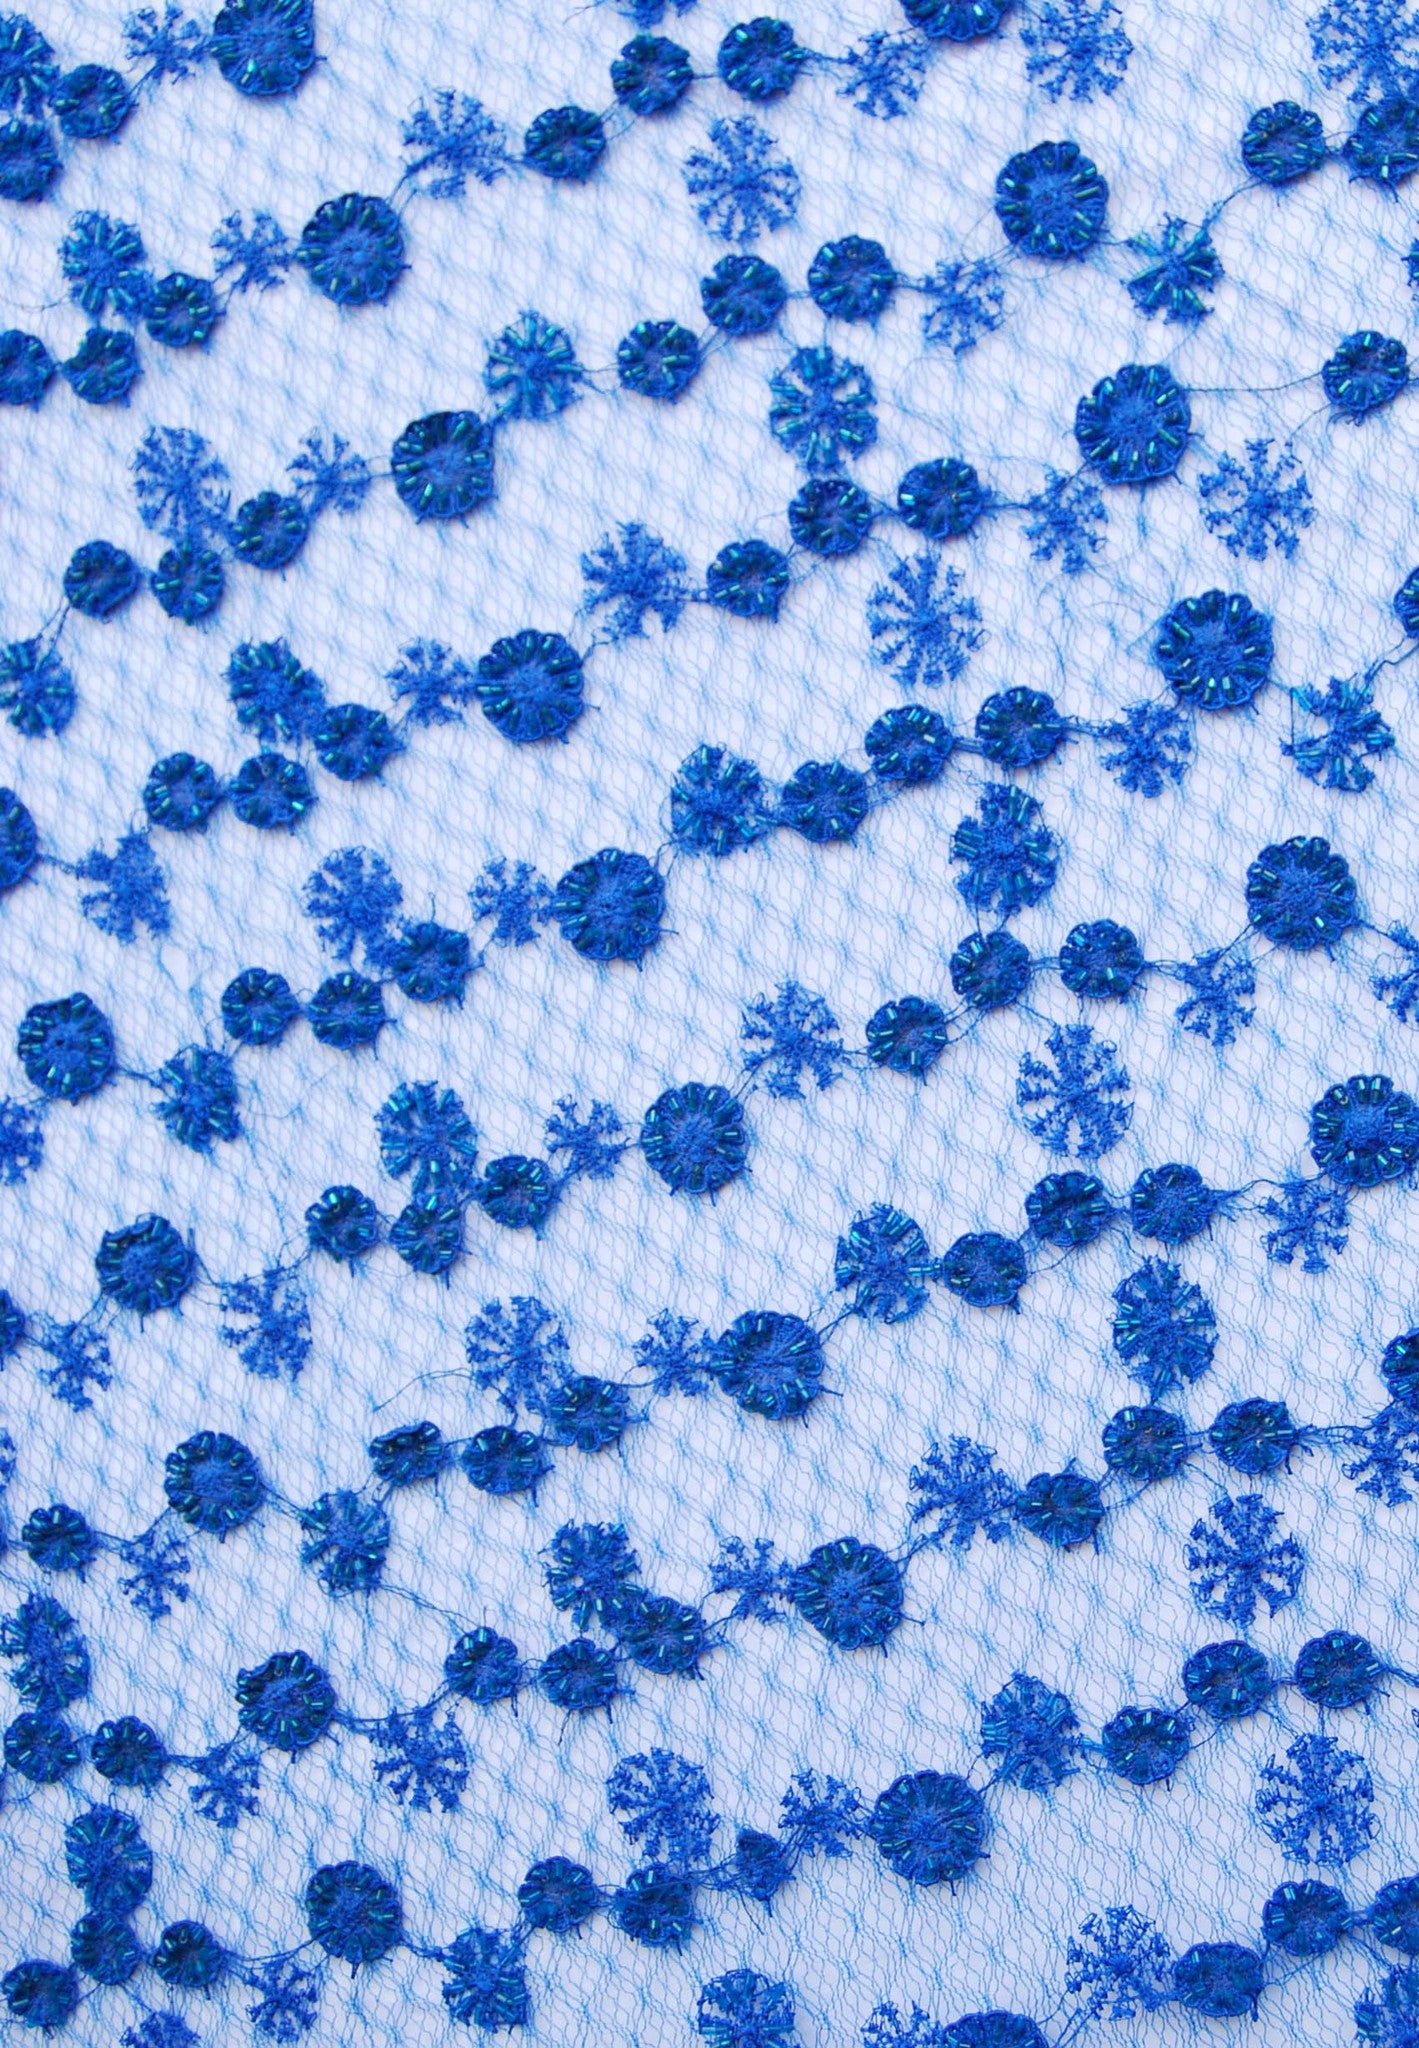 Royal Blue Beaded Lace (Sold as a 1.5 yard piece)